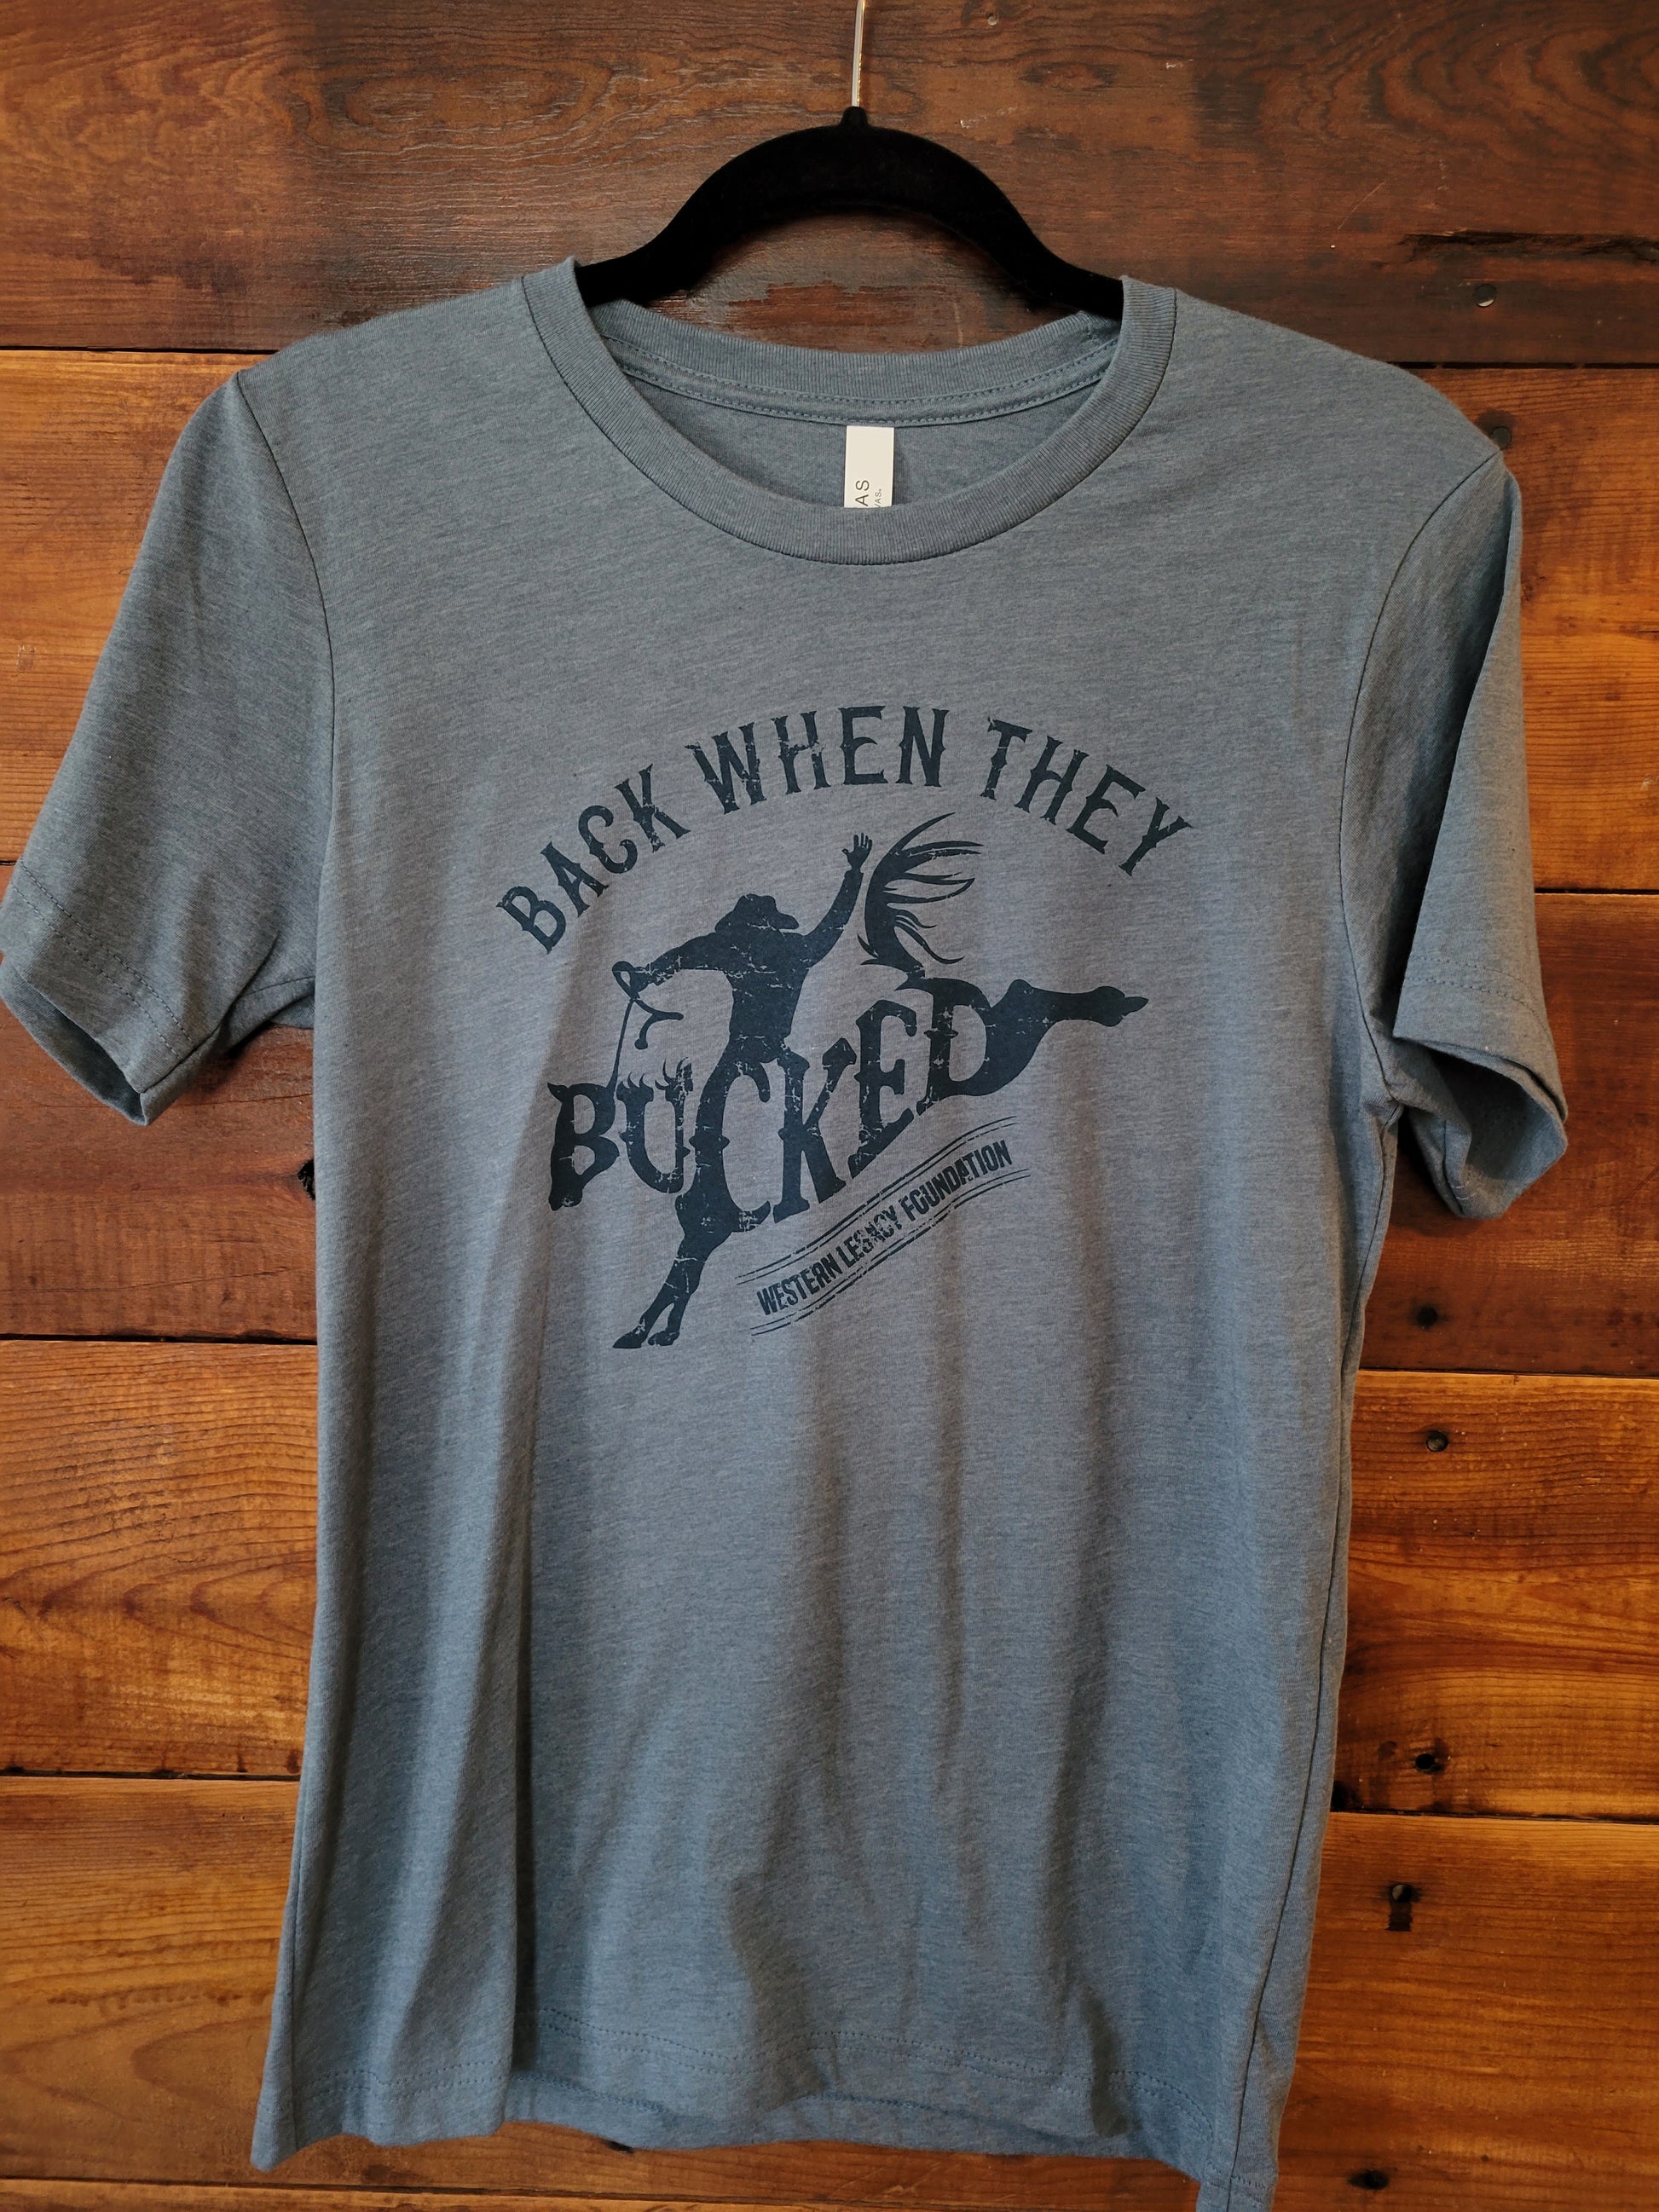 Back When They Bucked Heather Teal TShirt Teal print